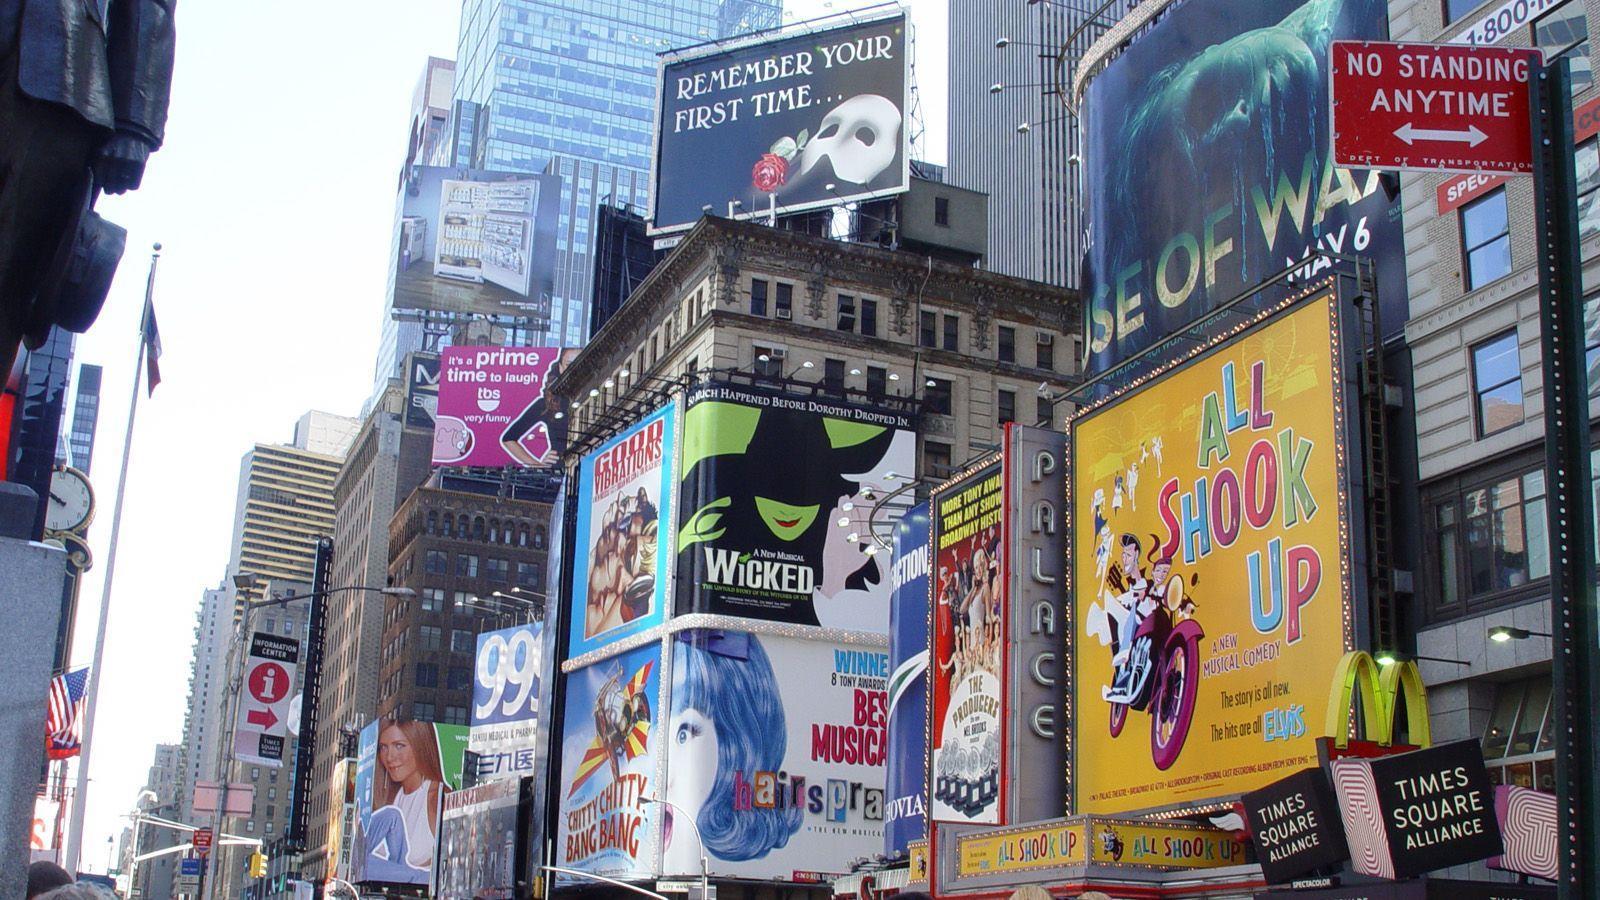 Broadway Background and Image (41)